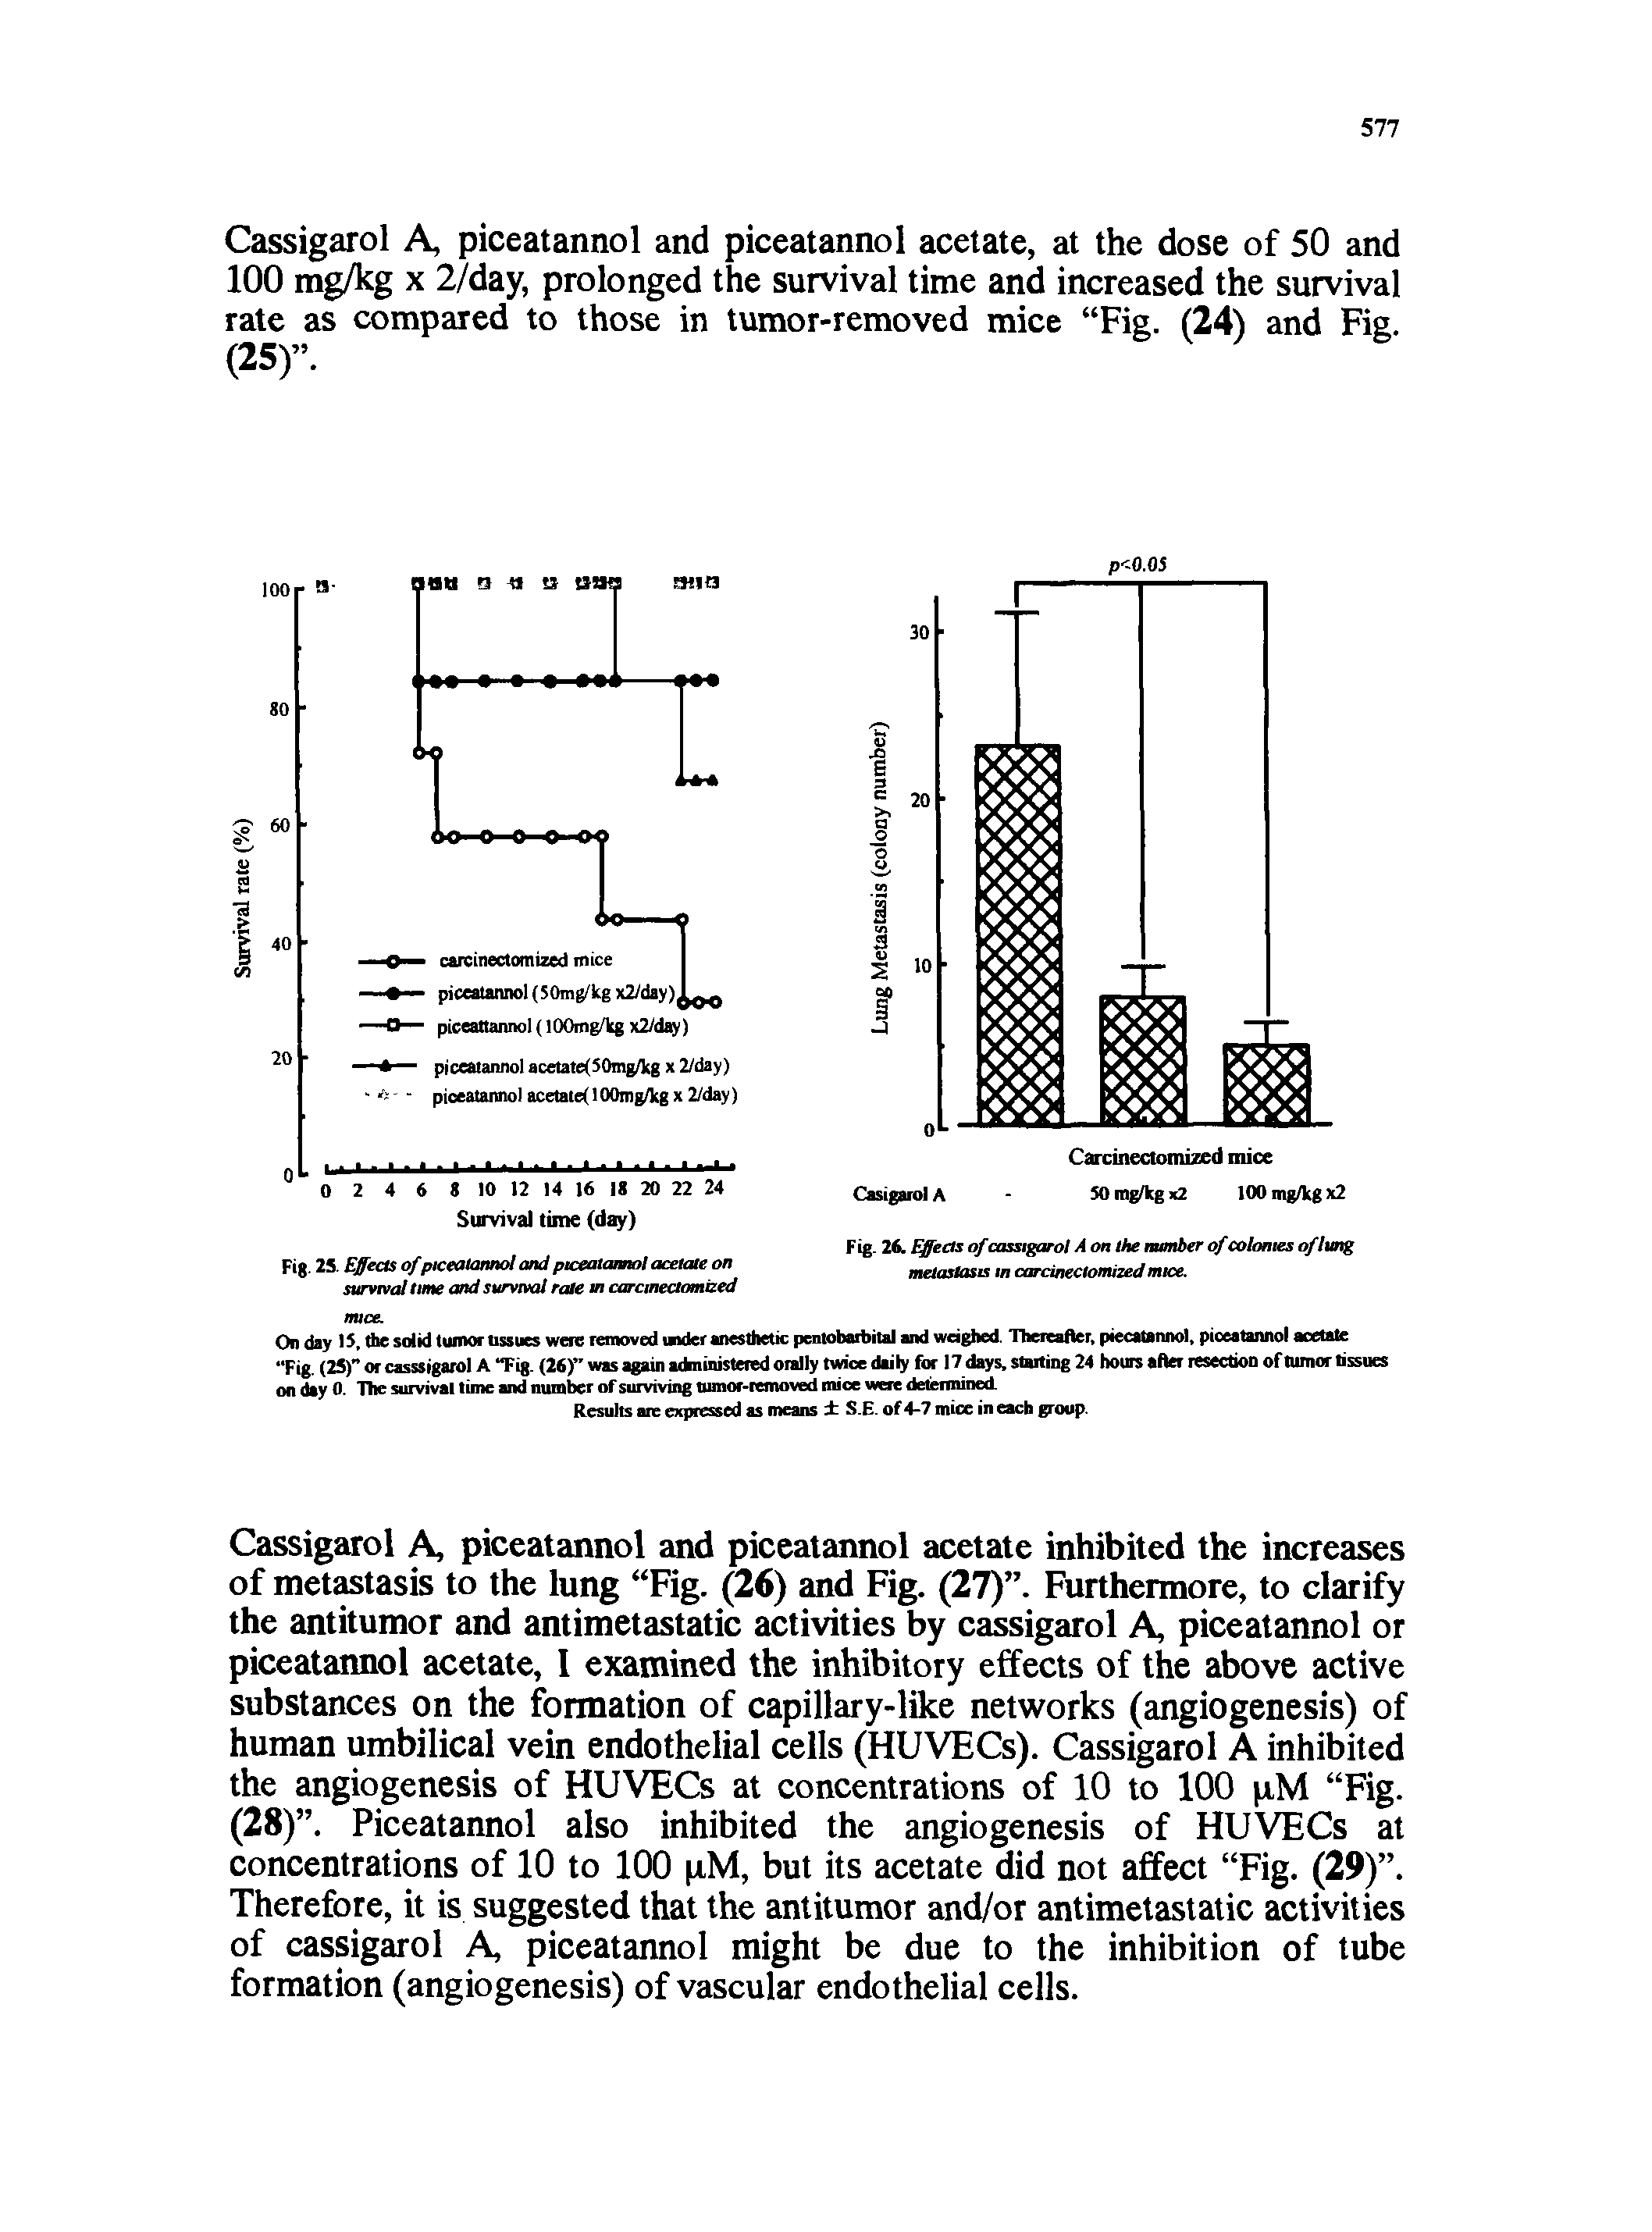 Fig. 26. Effects ofcassigarol A on the number ofcolonies of lung metastasis in carcinectomized mice.